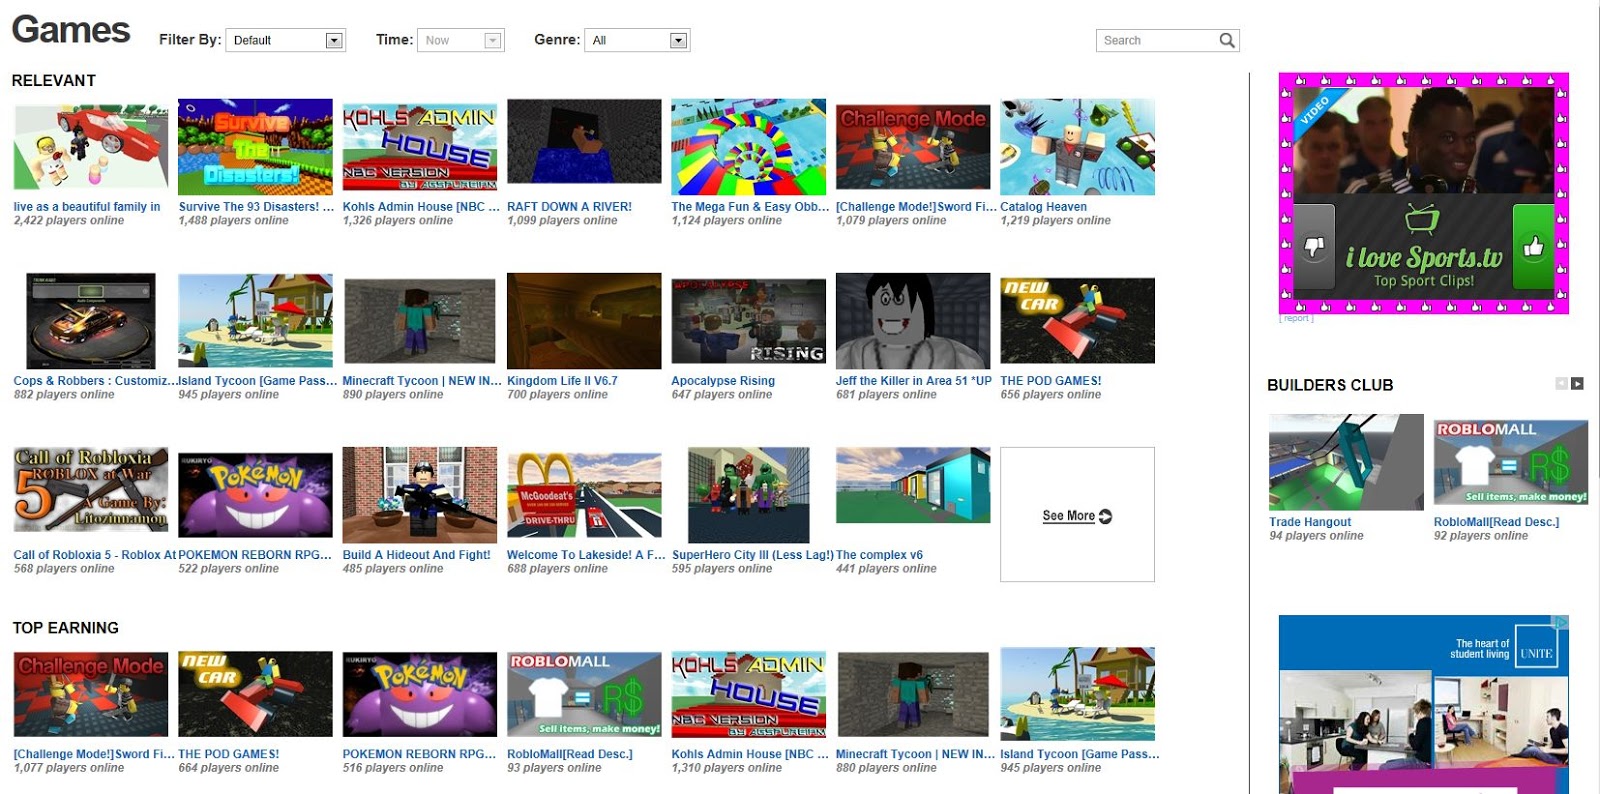 Unofficial Roblox Roblox Games Page Massive Layout Update New Look 2013 - new games new roblox pictures